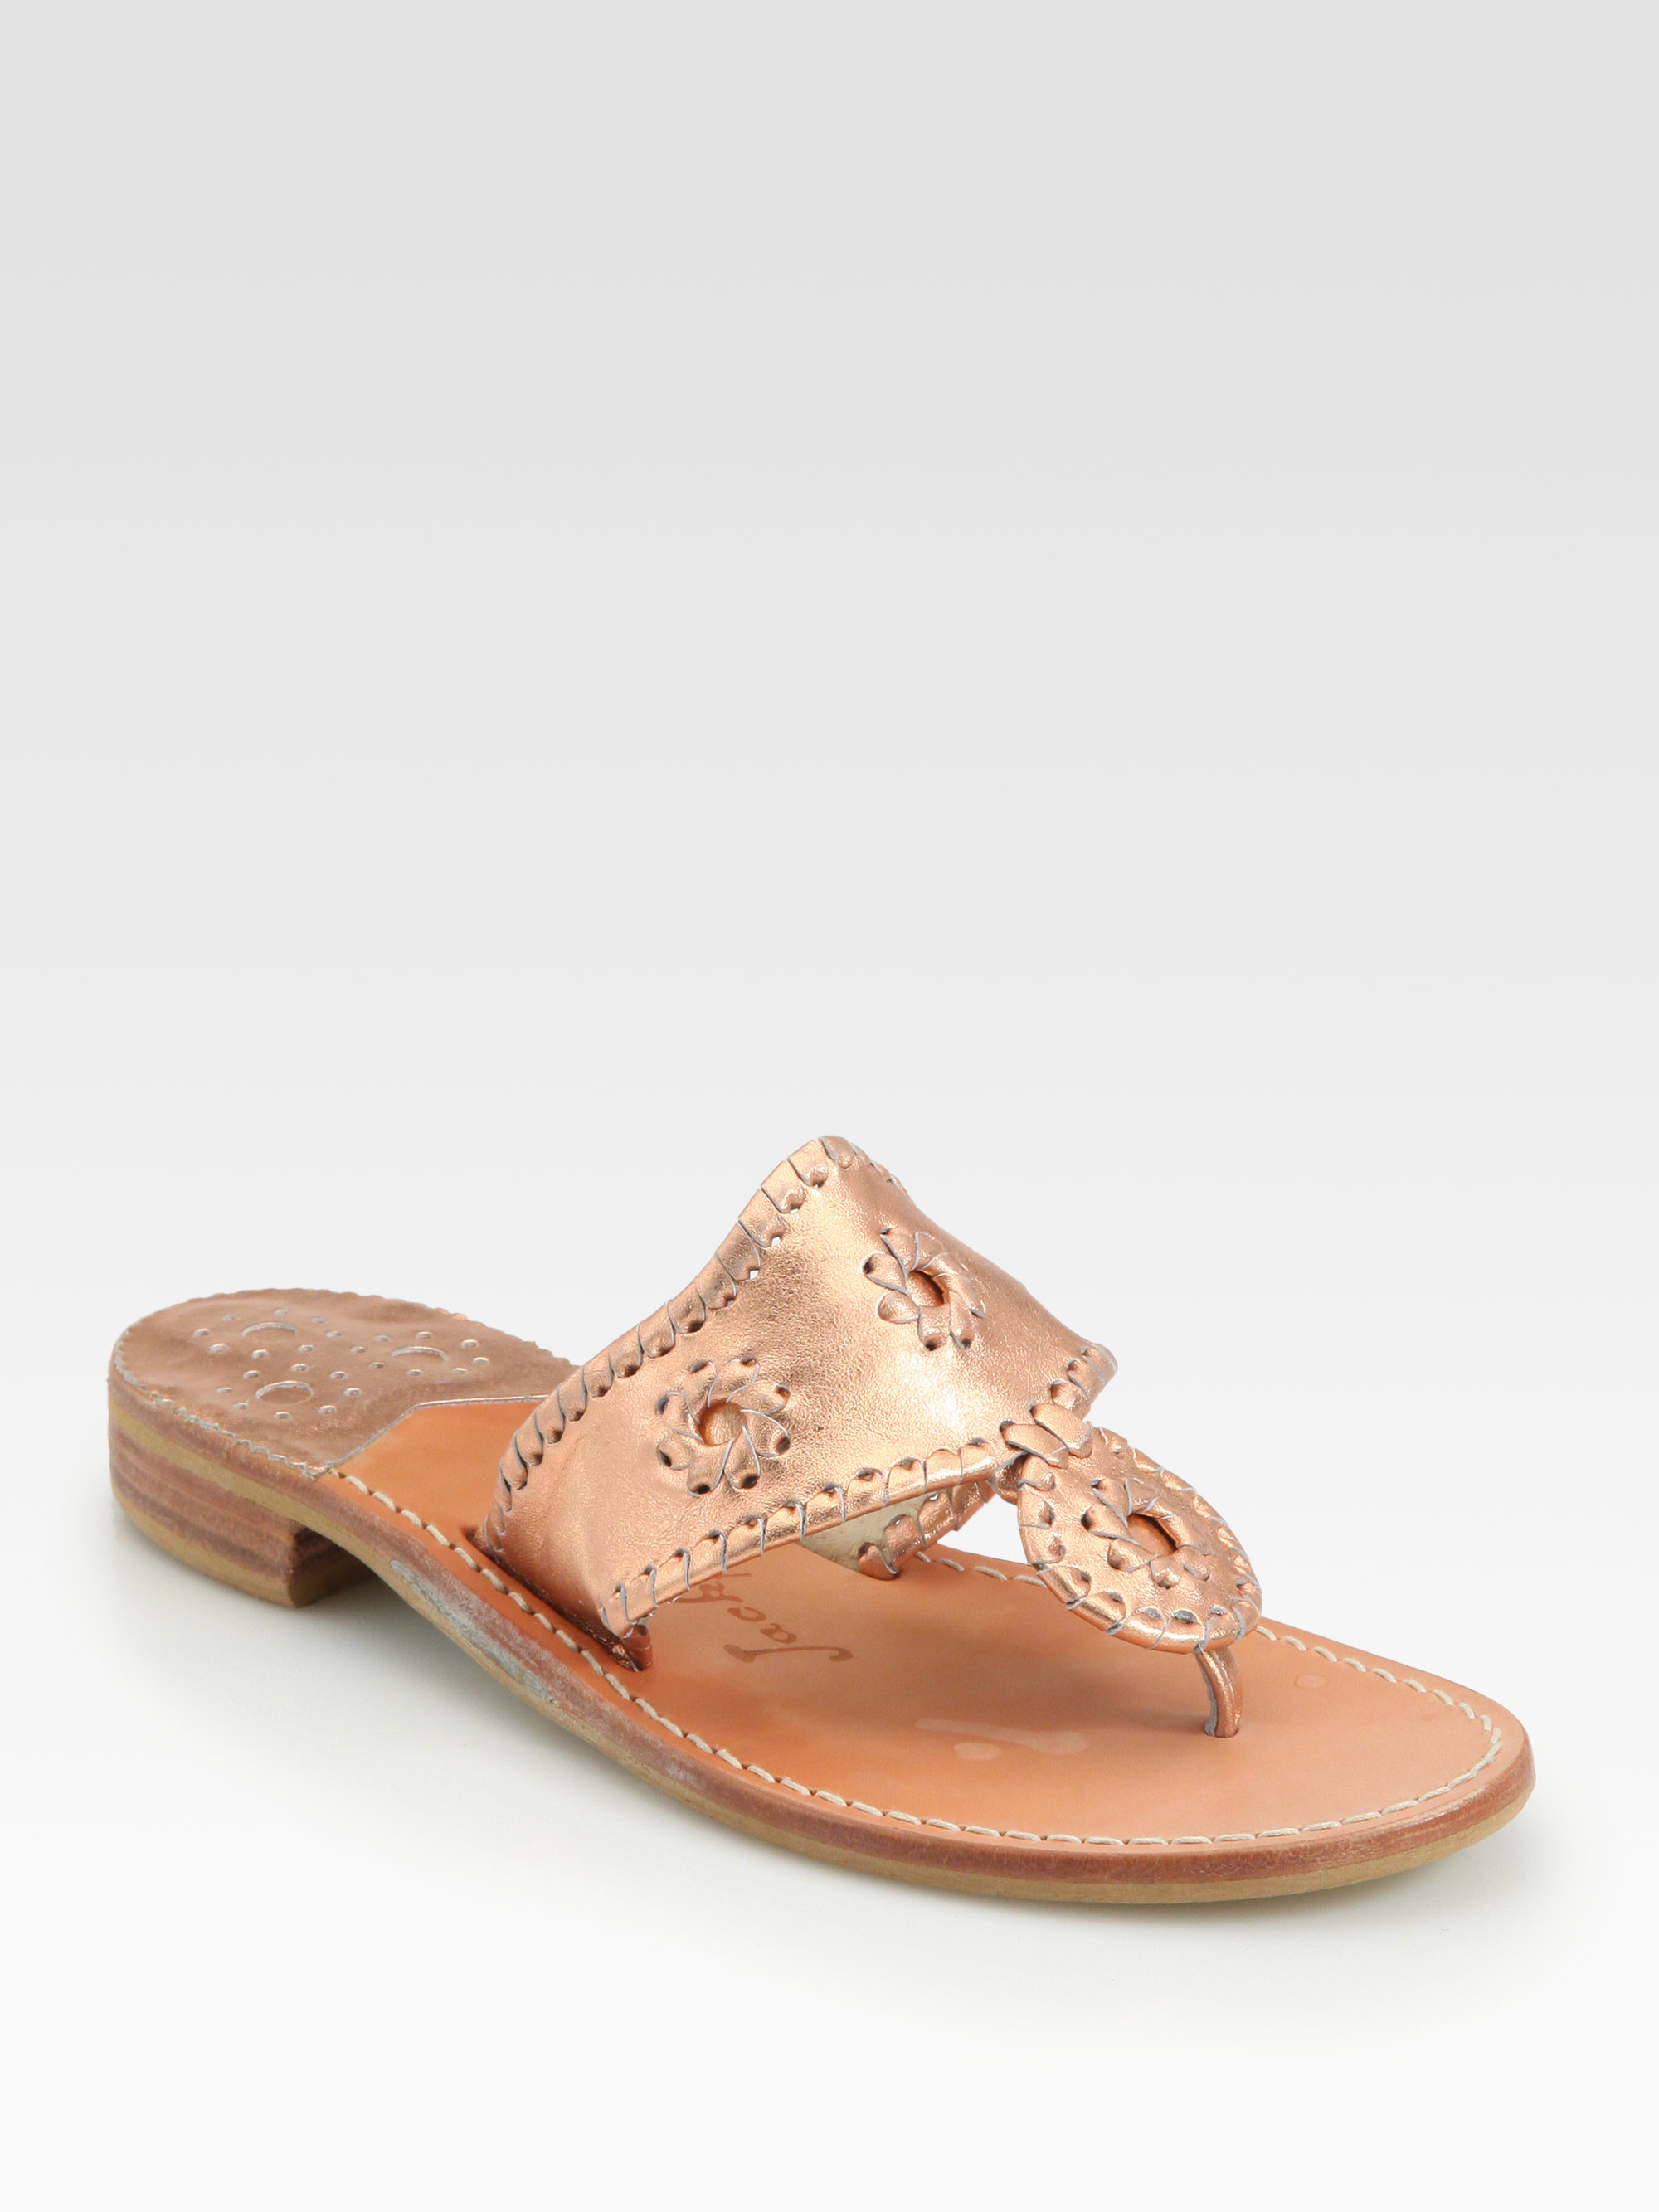 Jack Rogers Metallic Leather Hamptons Thong Sandals in (copper) | Lyst